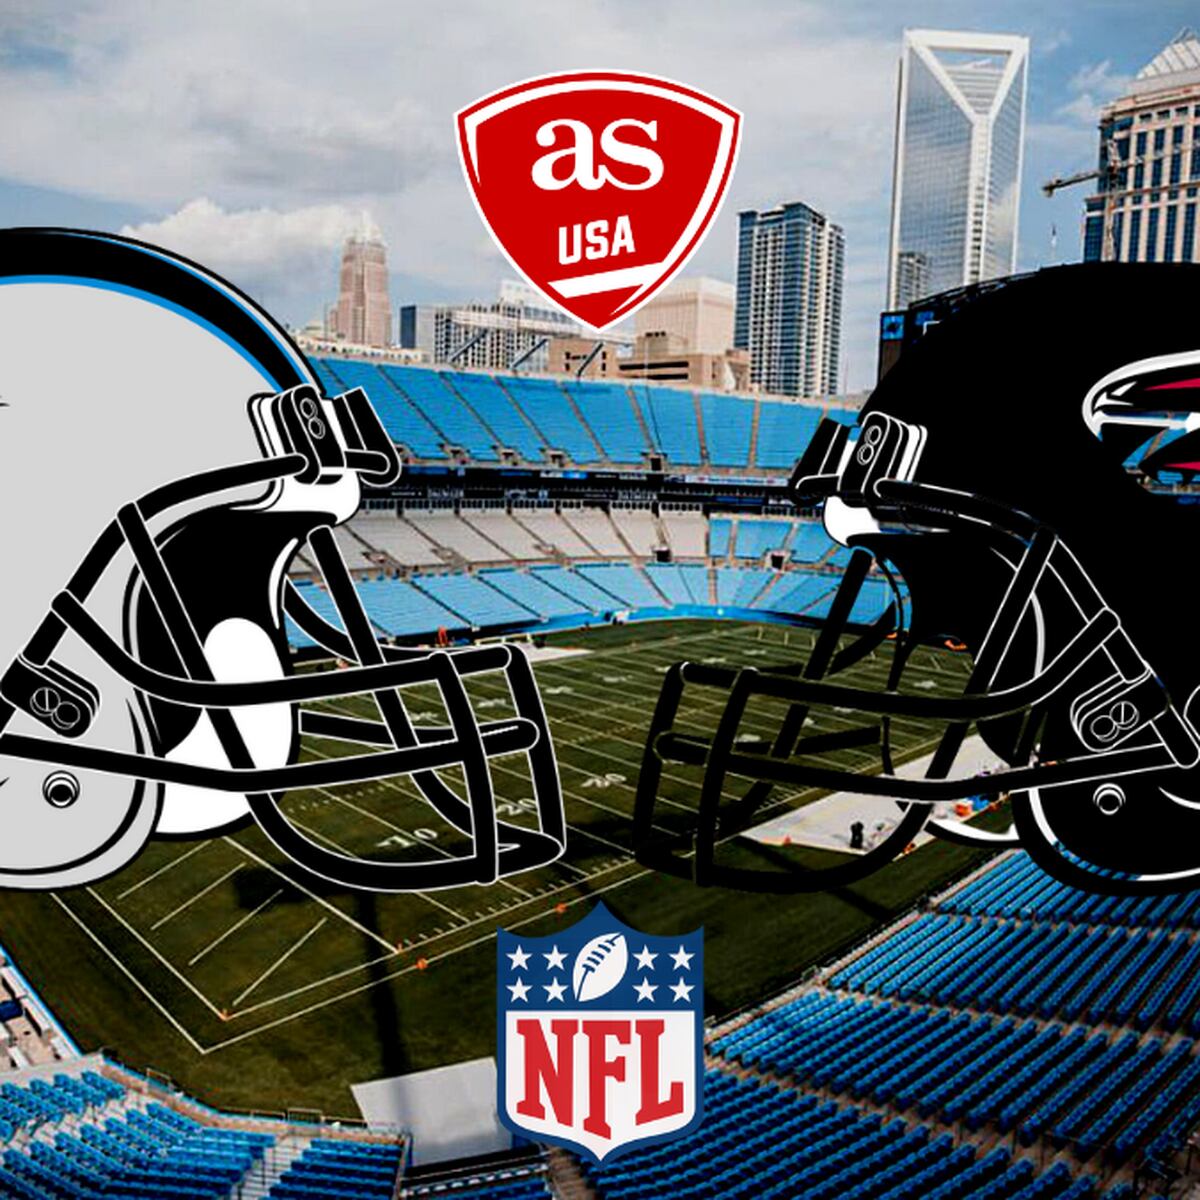 Panthers vs. Falcons Livestream: How to Watch NFL Week 1 Online